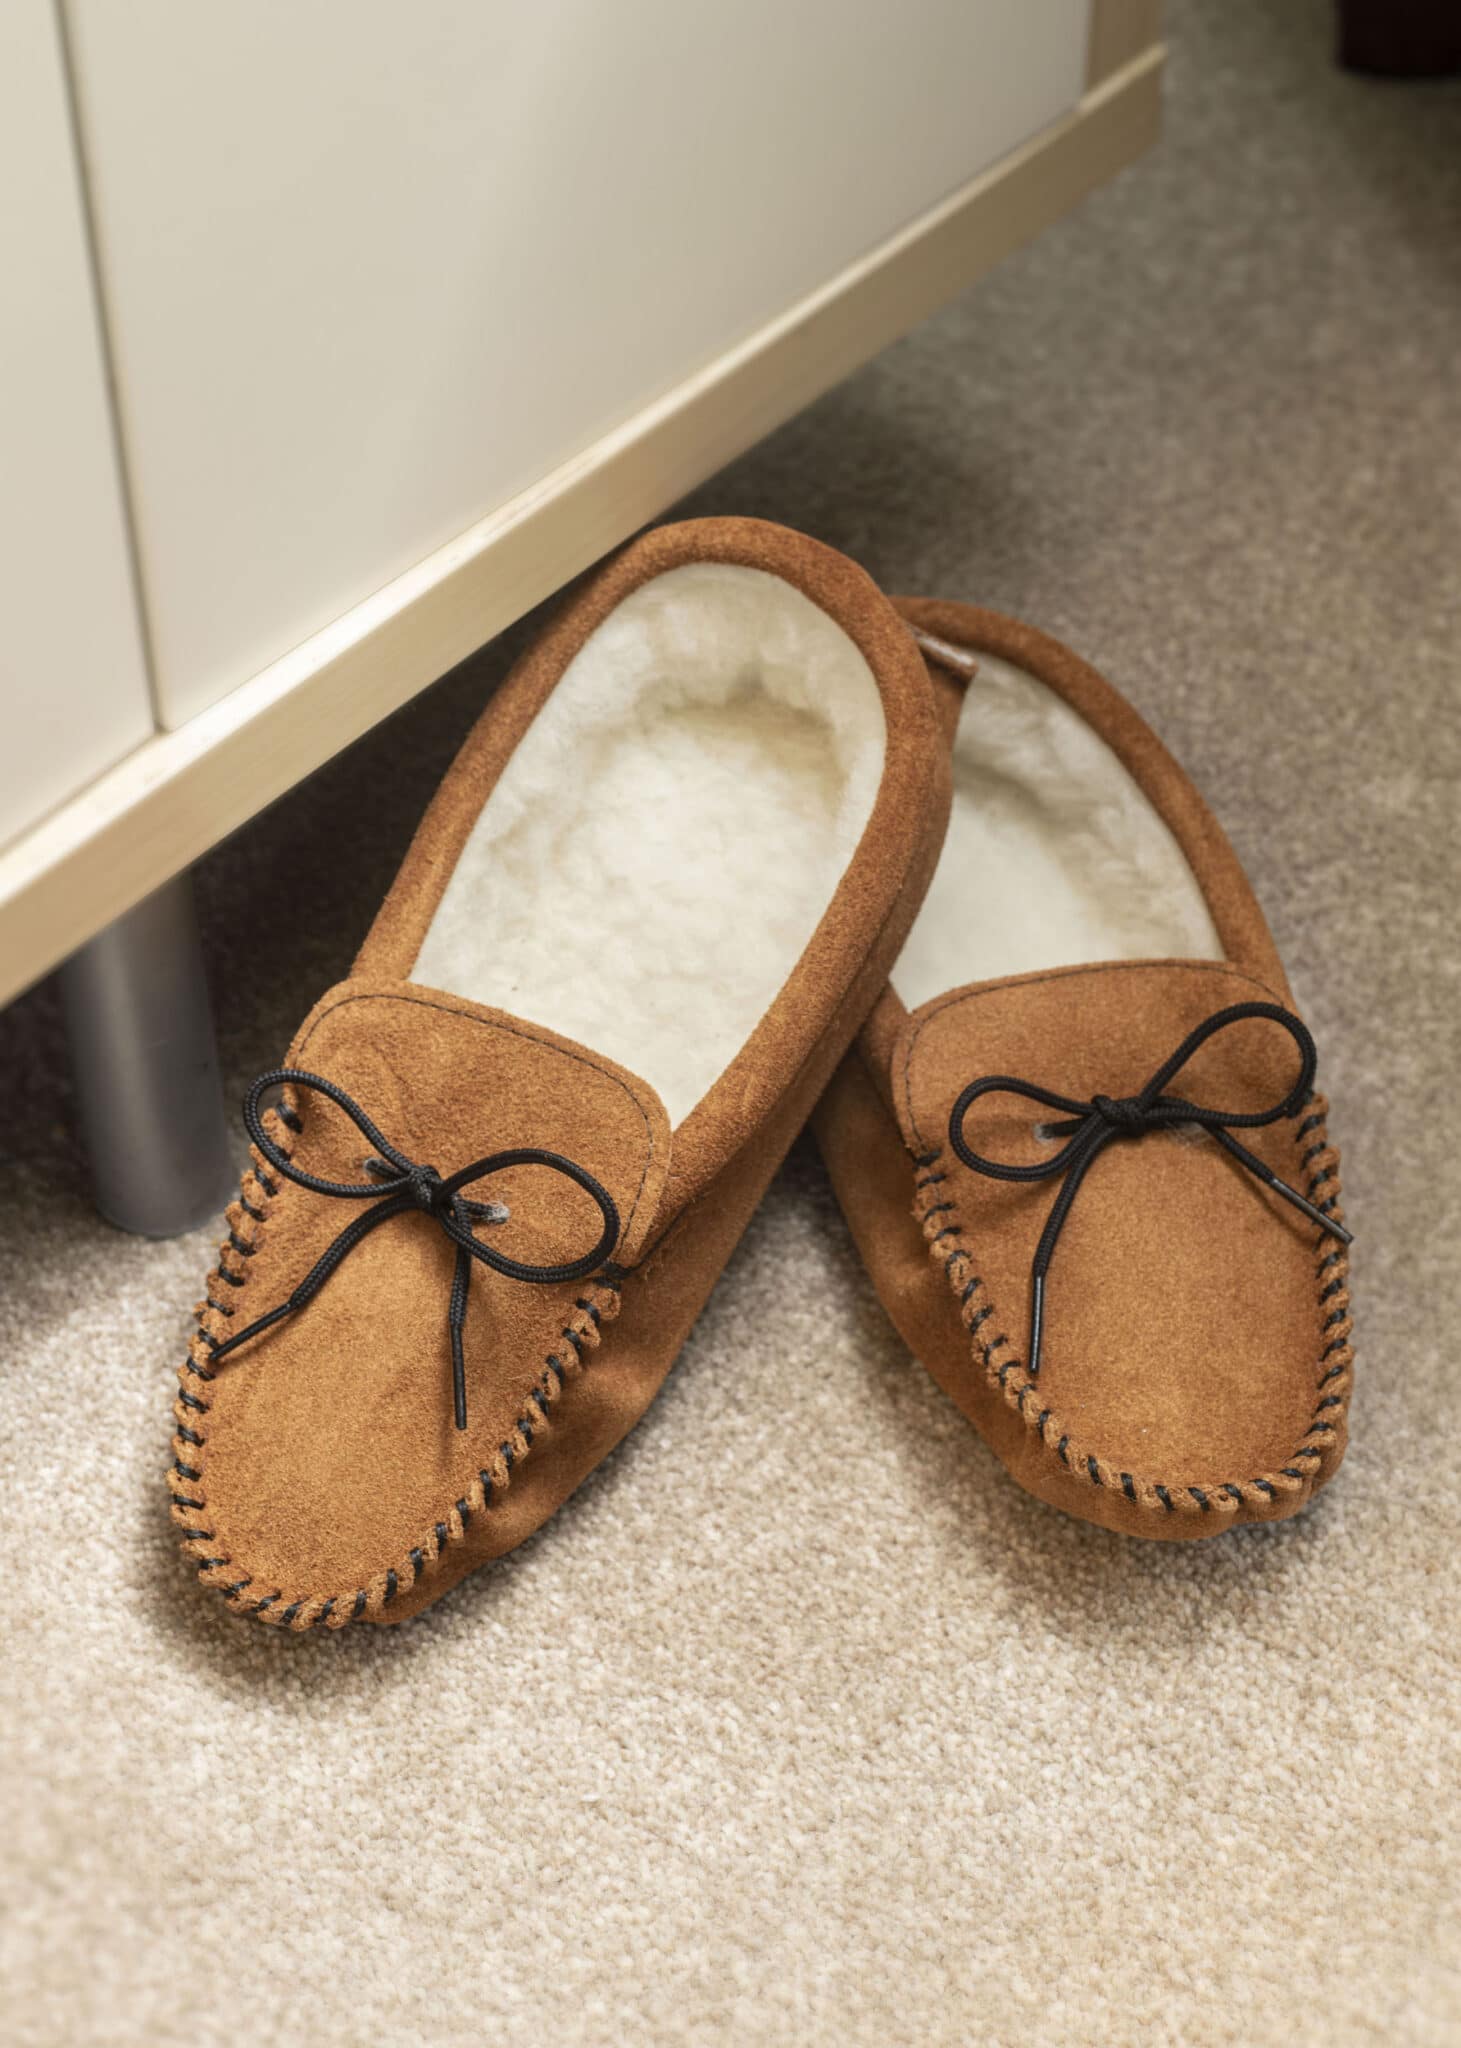 Ladies Sheepskin Moccasin Slipper with Safety Sole - Atlantic Shore